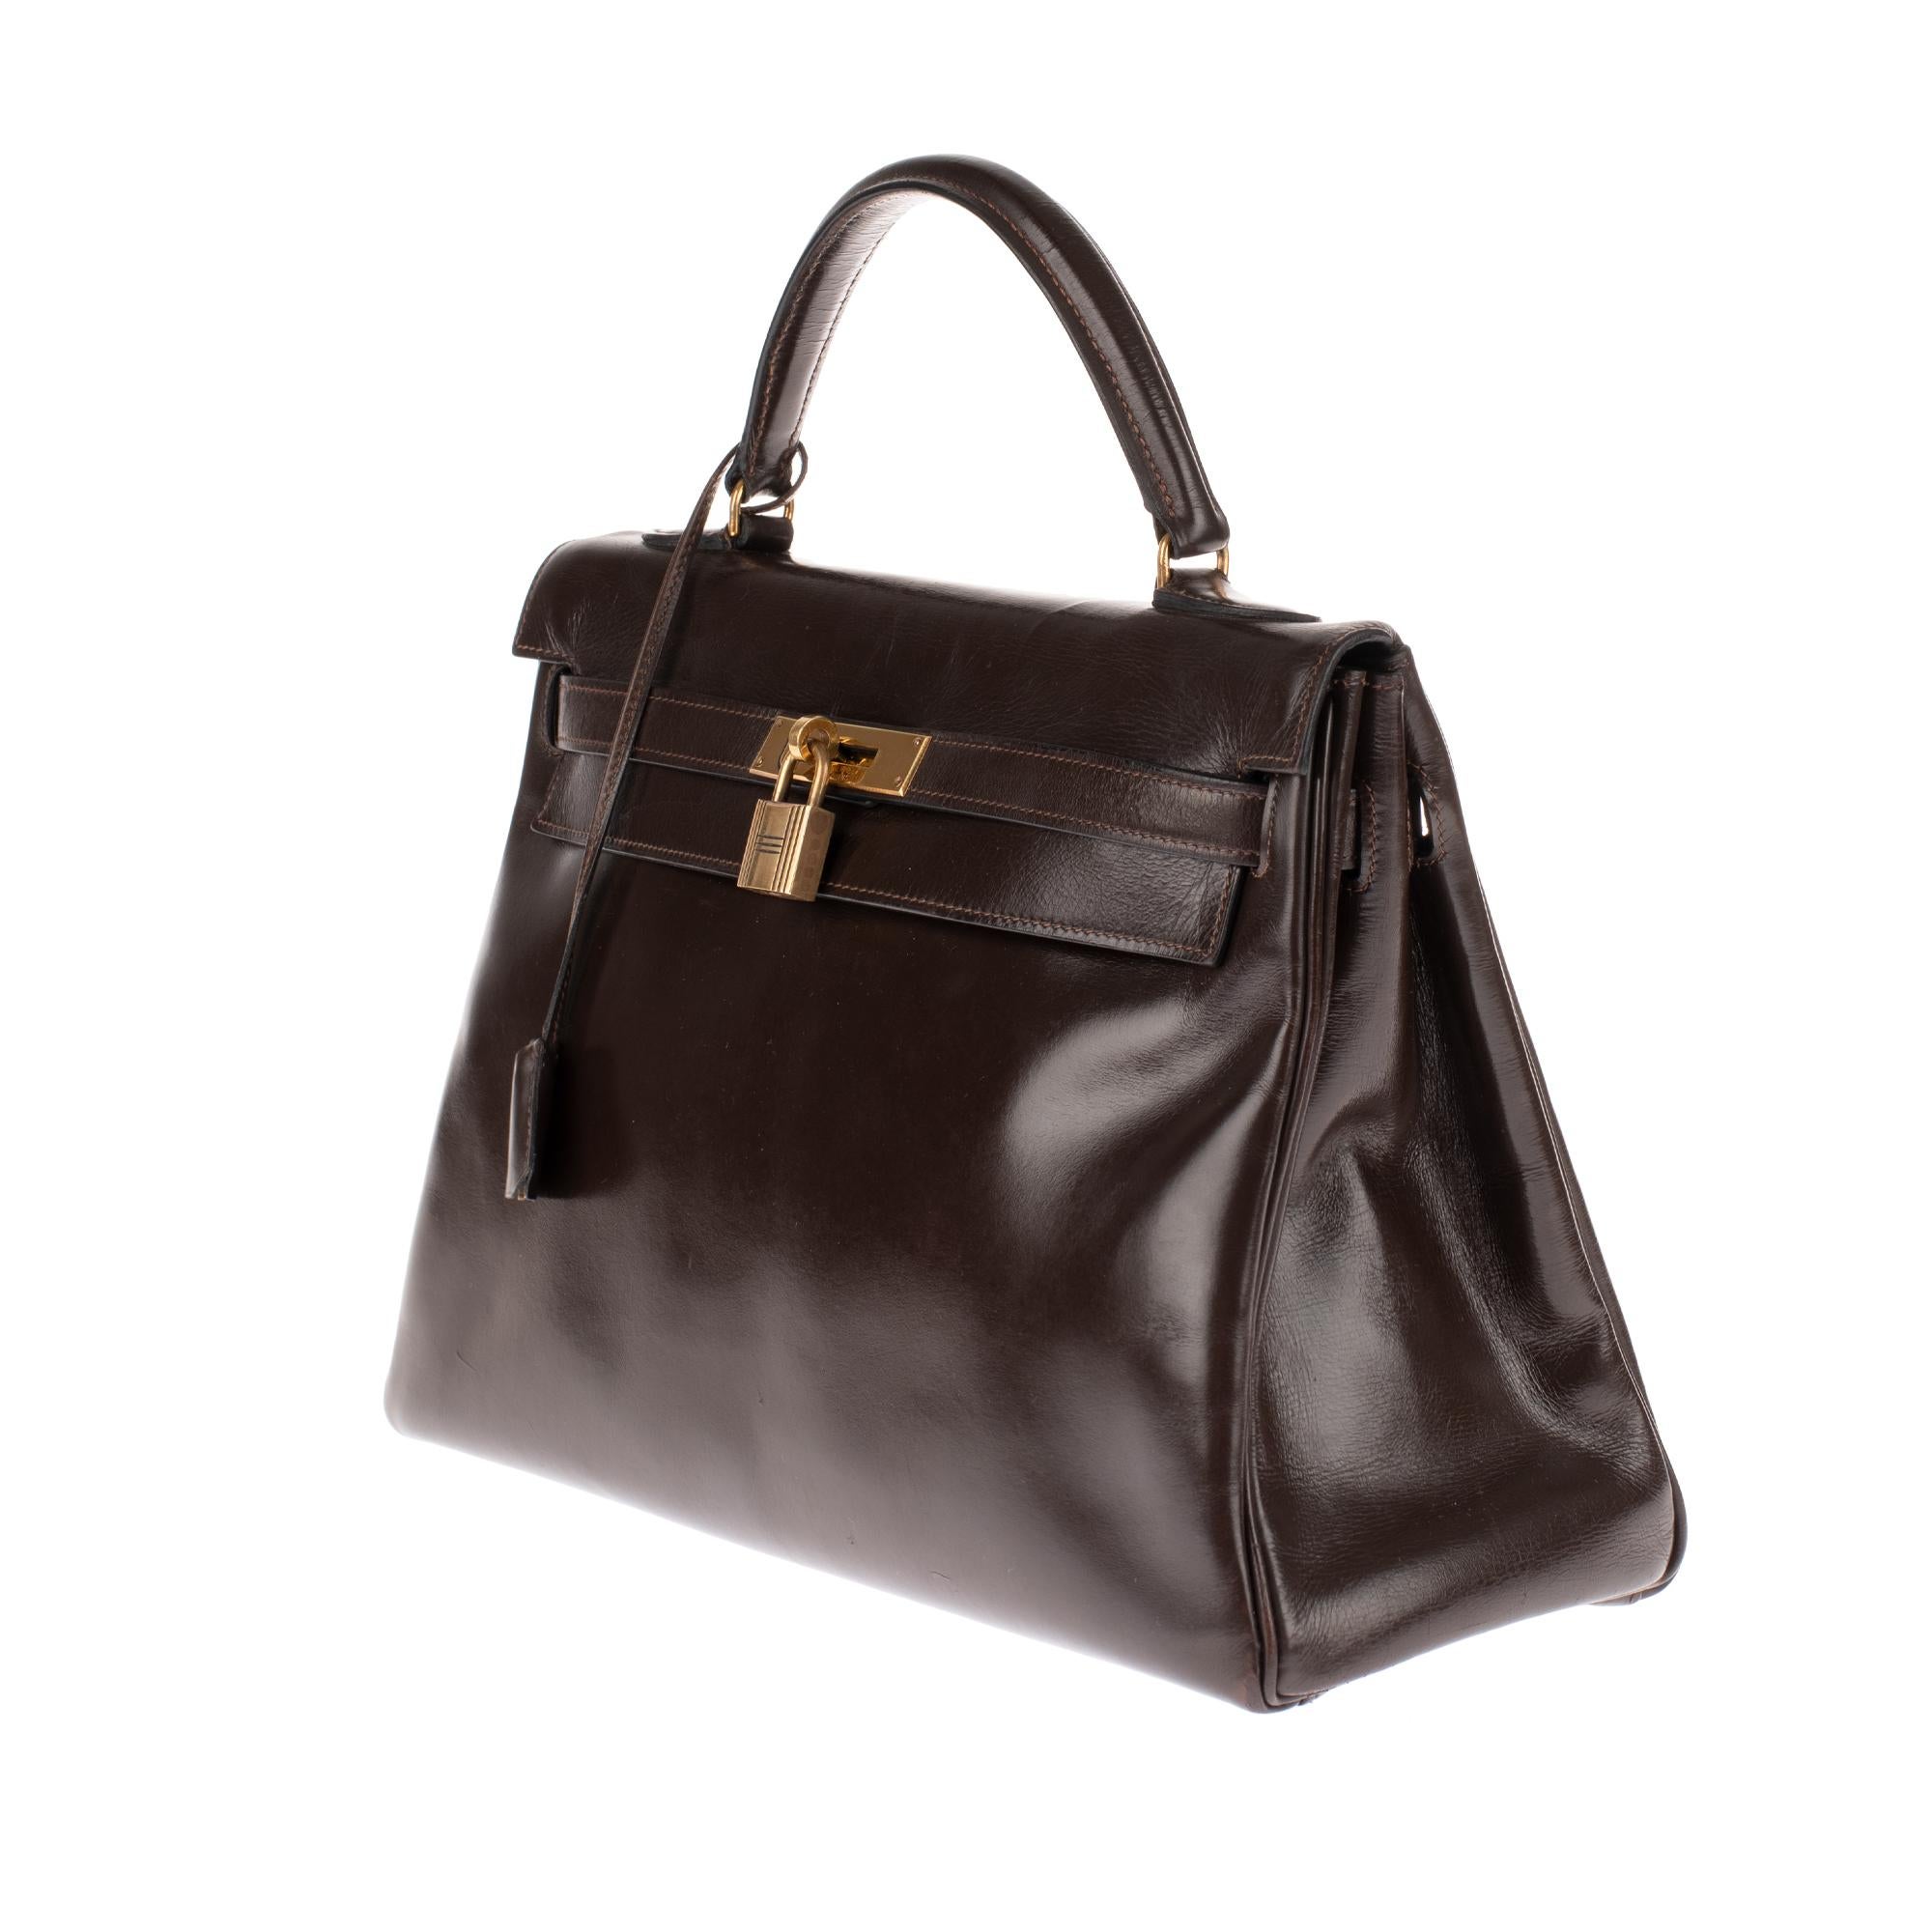 Women's Hermès Kelly 32 handbag in brown calfskin leather with strap and golden hardware